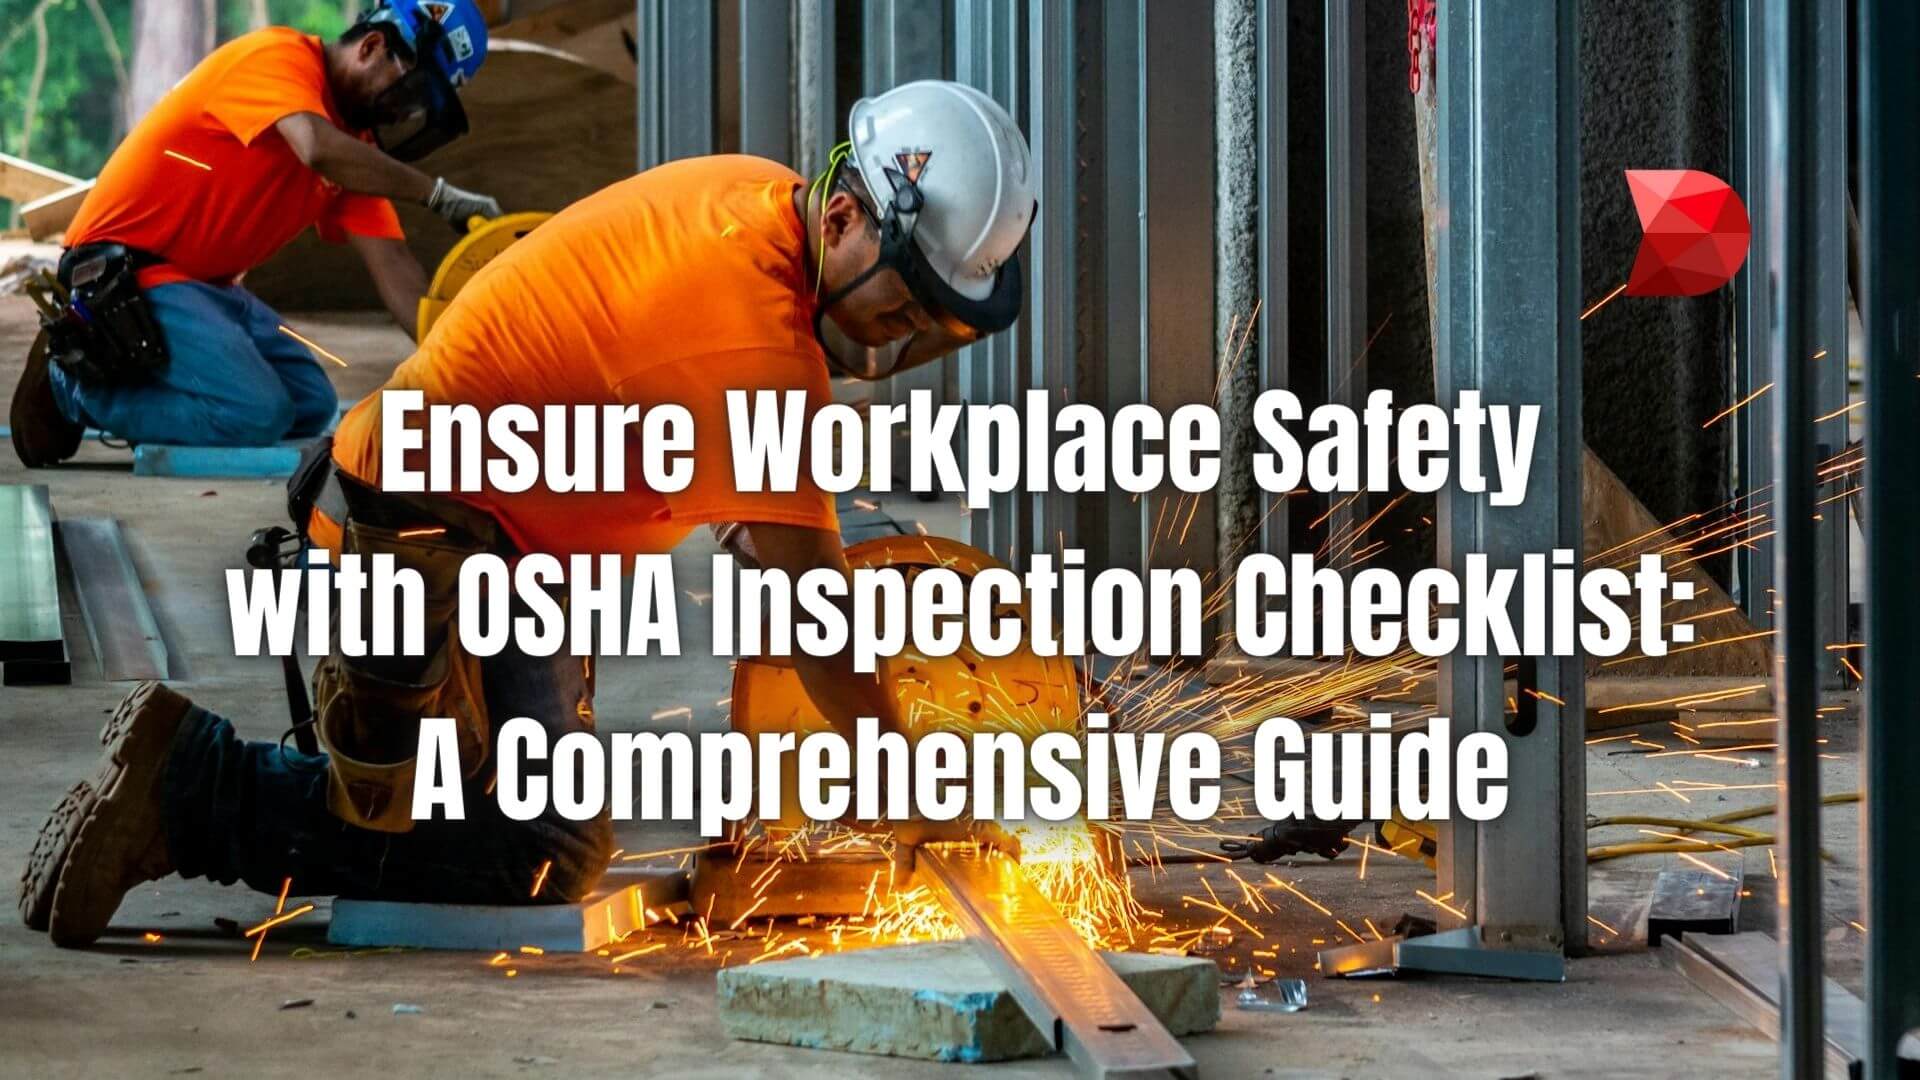 Ensure compliance and protect your team today! Discover essential workplace safety tips with our full OSHA inspection checklist guide.